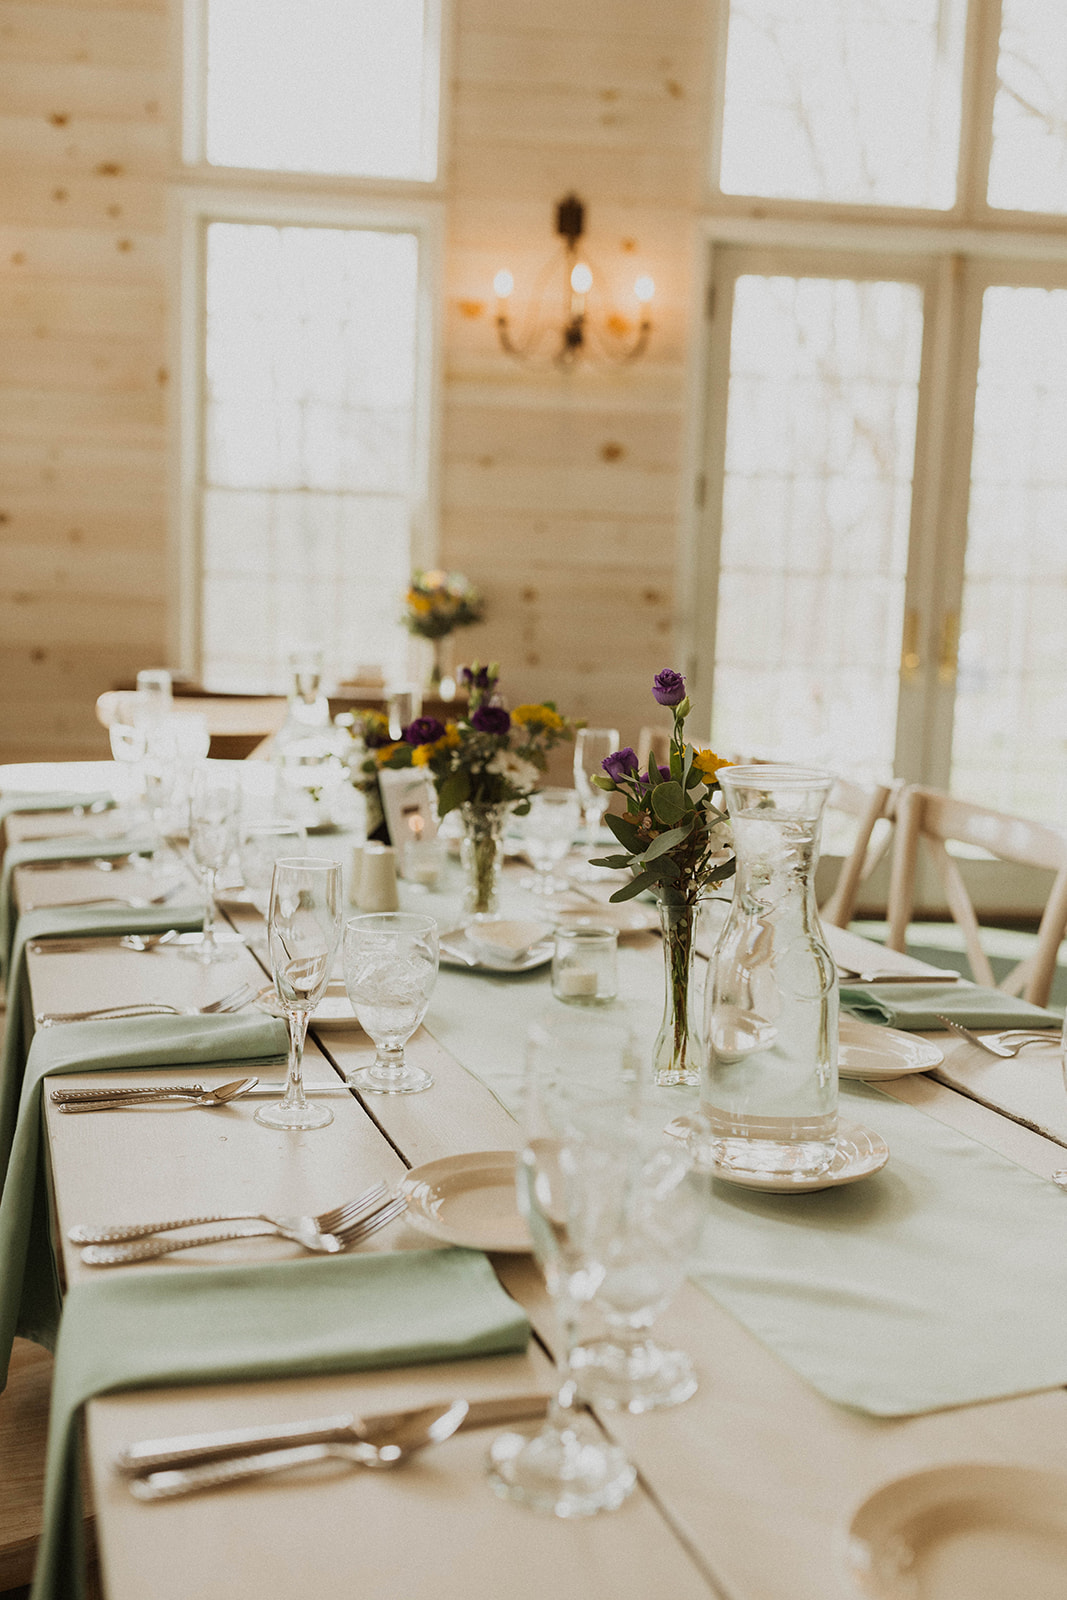 Dreamy upstate New York wedding venue set up and ready for the reception